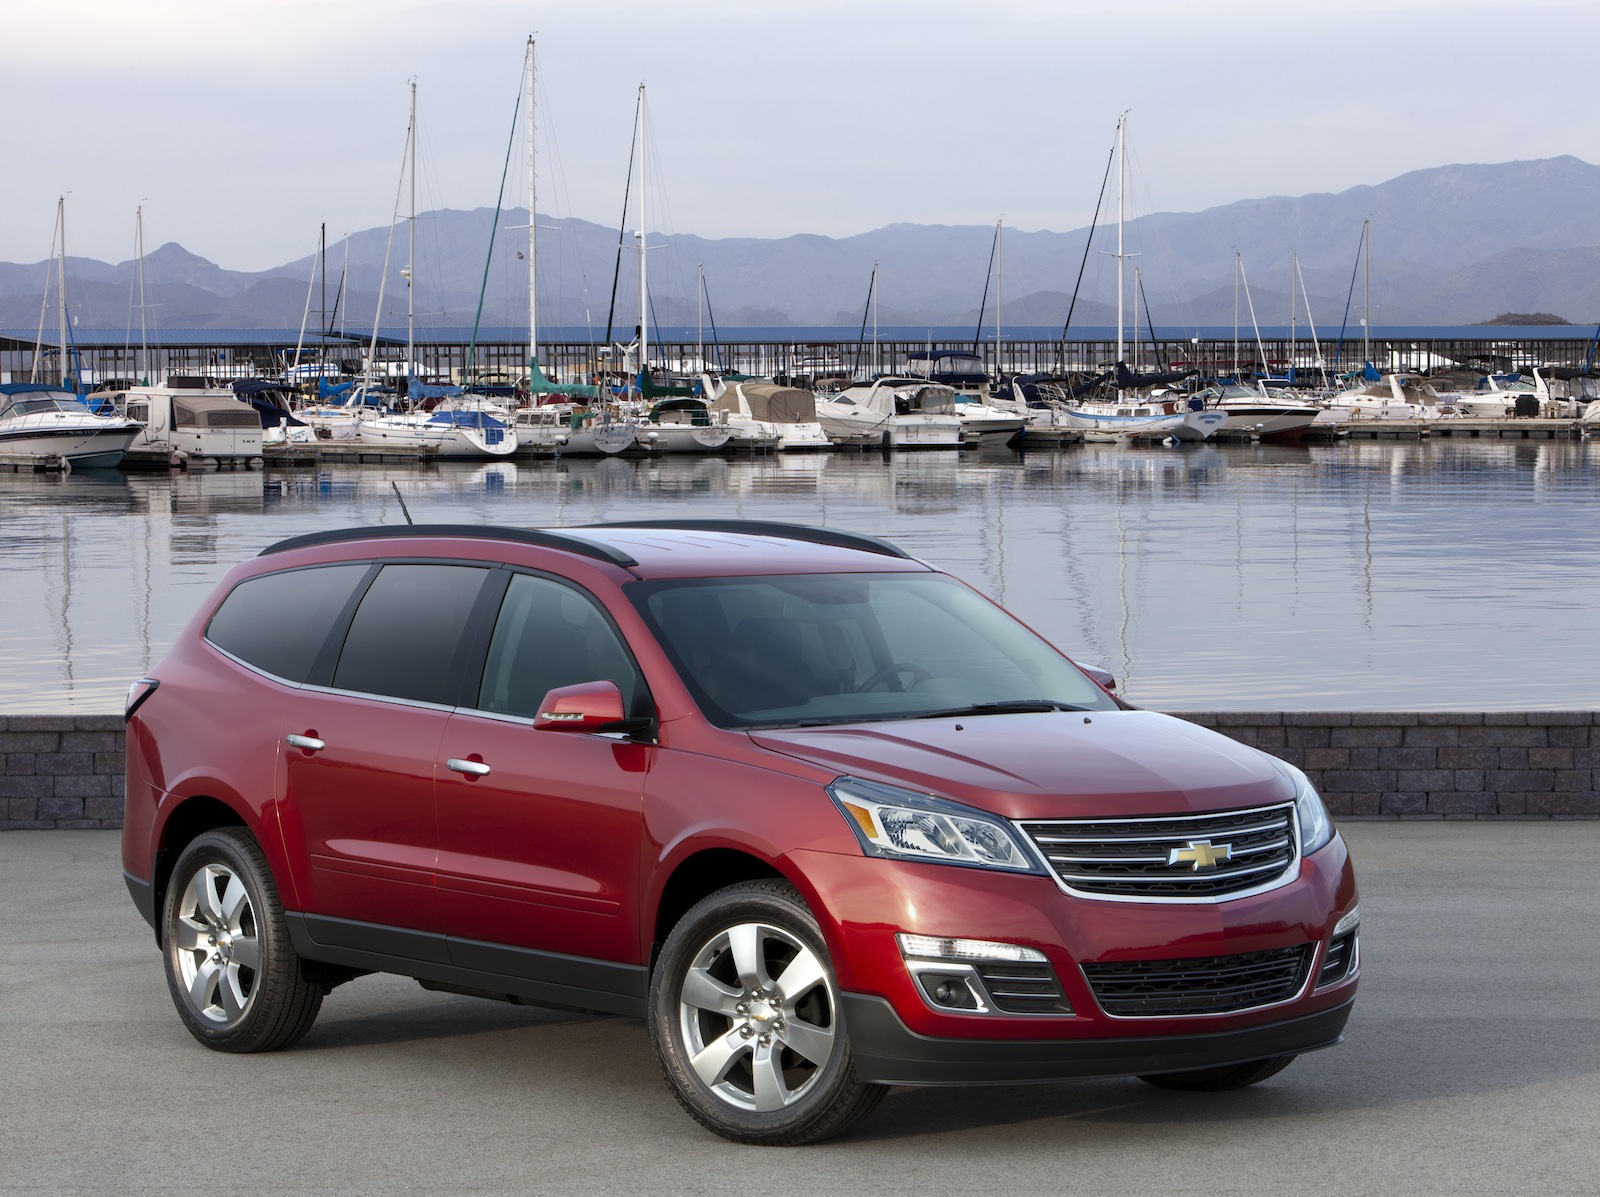 2013 Chevrolet Traverse (Chevy) Review, Ratings, Specs, Prices, and Photos  - The Car Connection